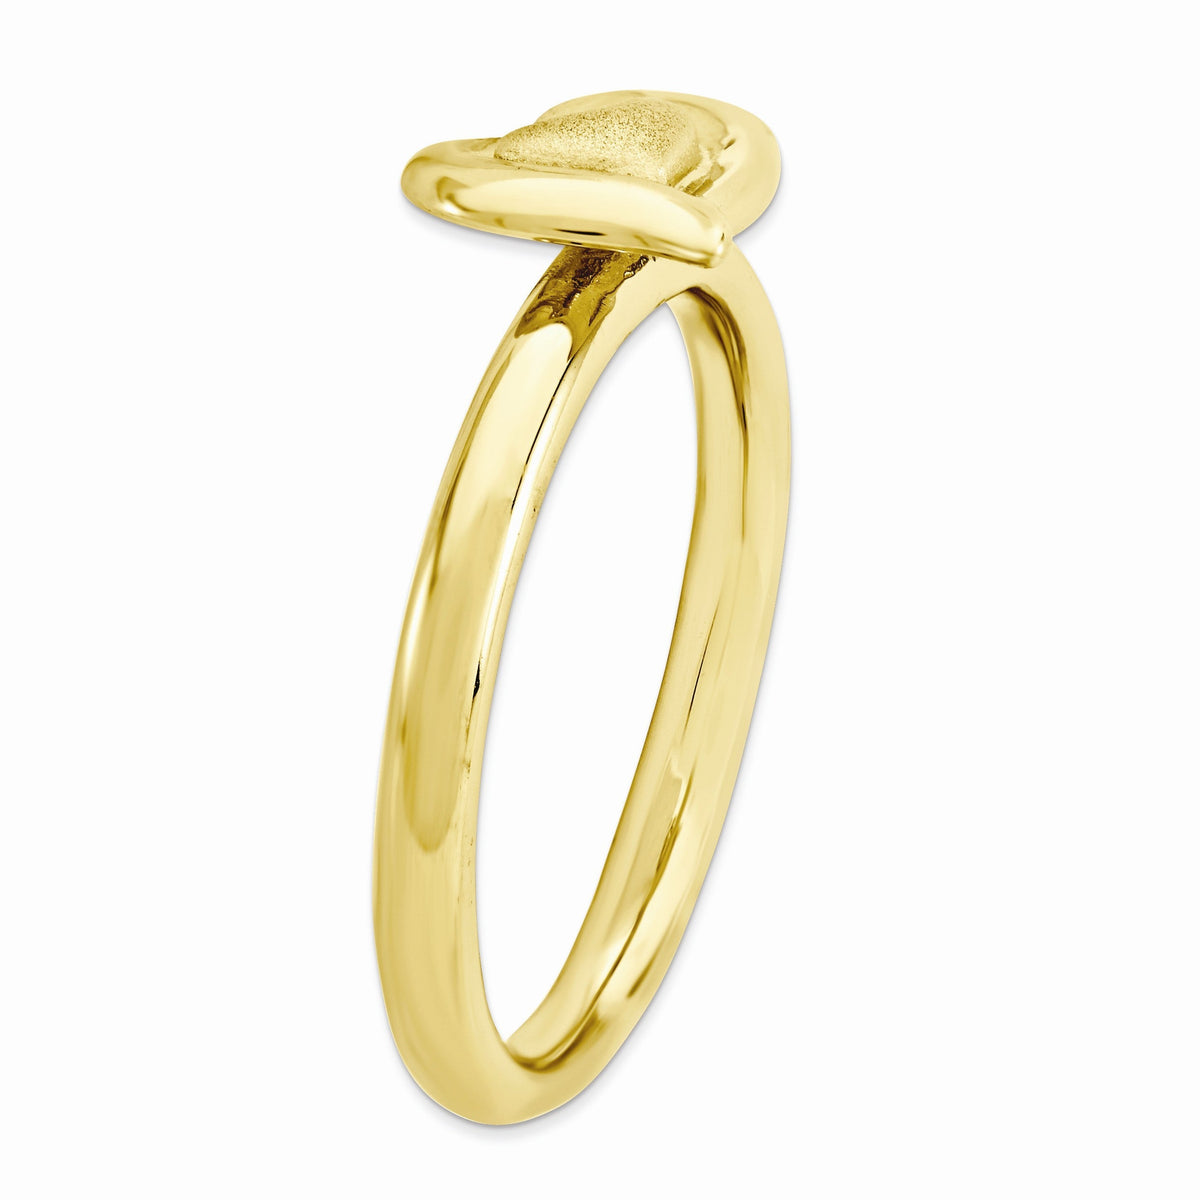 Alternate view of the Yellow Gold Tone Plated Sterling Silver Stackable 9mm Heart Ring by The Black Bow Jewelry Co.